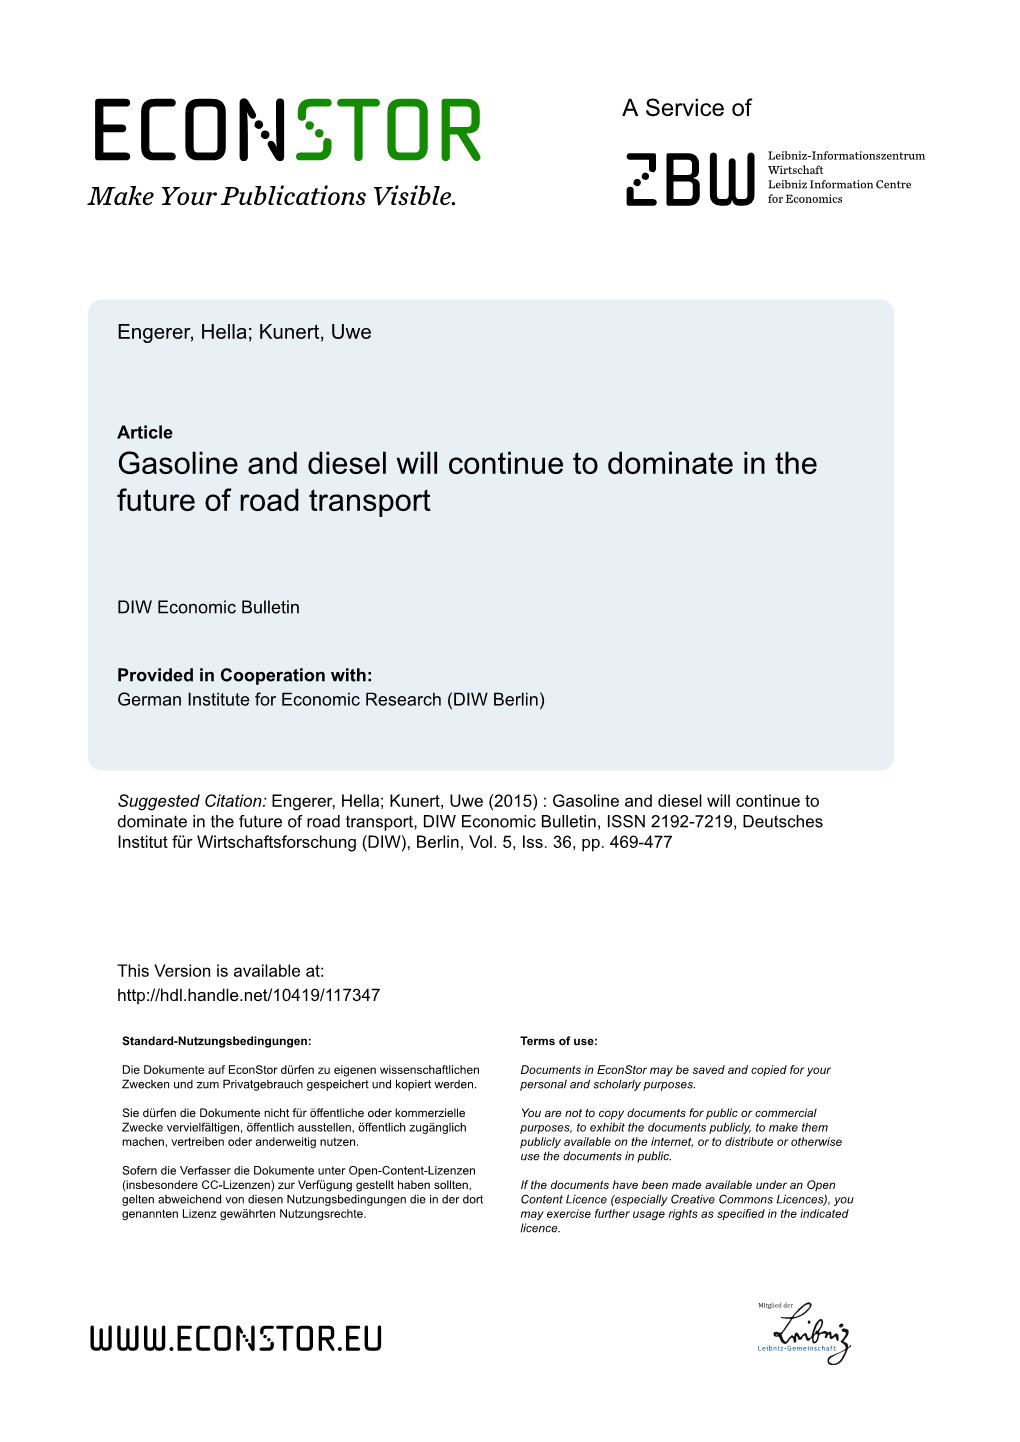 Gasoline and Diesel Will Continue to Dominate in the Future of Road Transport